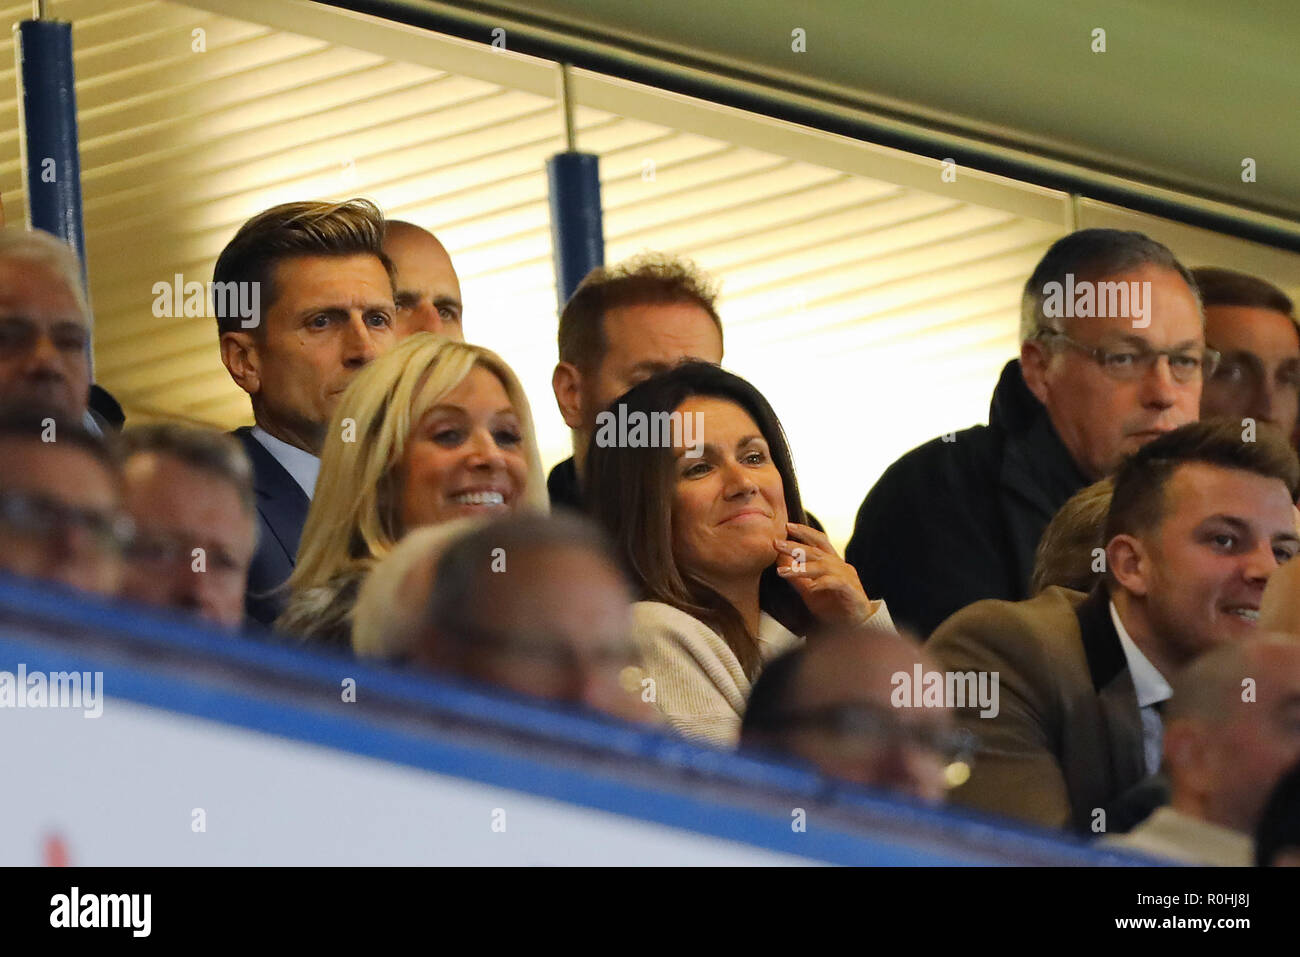 TV Presenter, Susanna Reid watches with Crystal Palace chairman Steve Parish - Chelsea v Crystal Palace, Premier League, Stamford Bridge, London - 4th November 2018 STRICTLY EDITORIAL USE ONLY